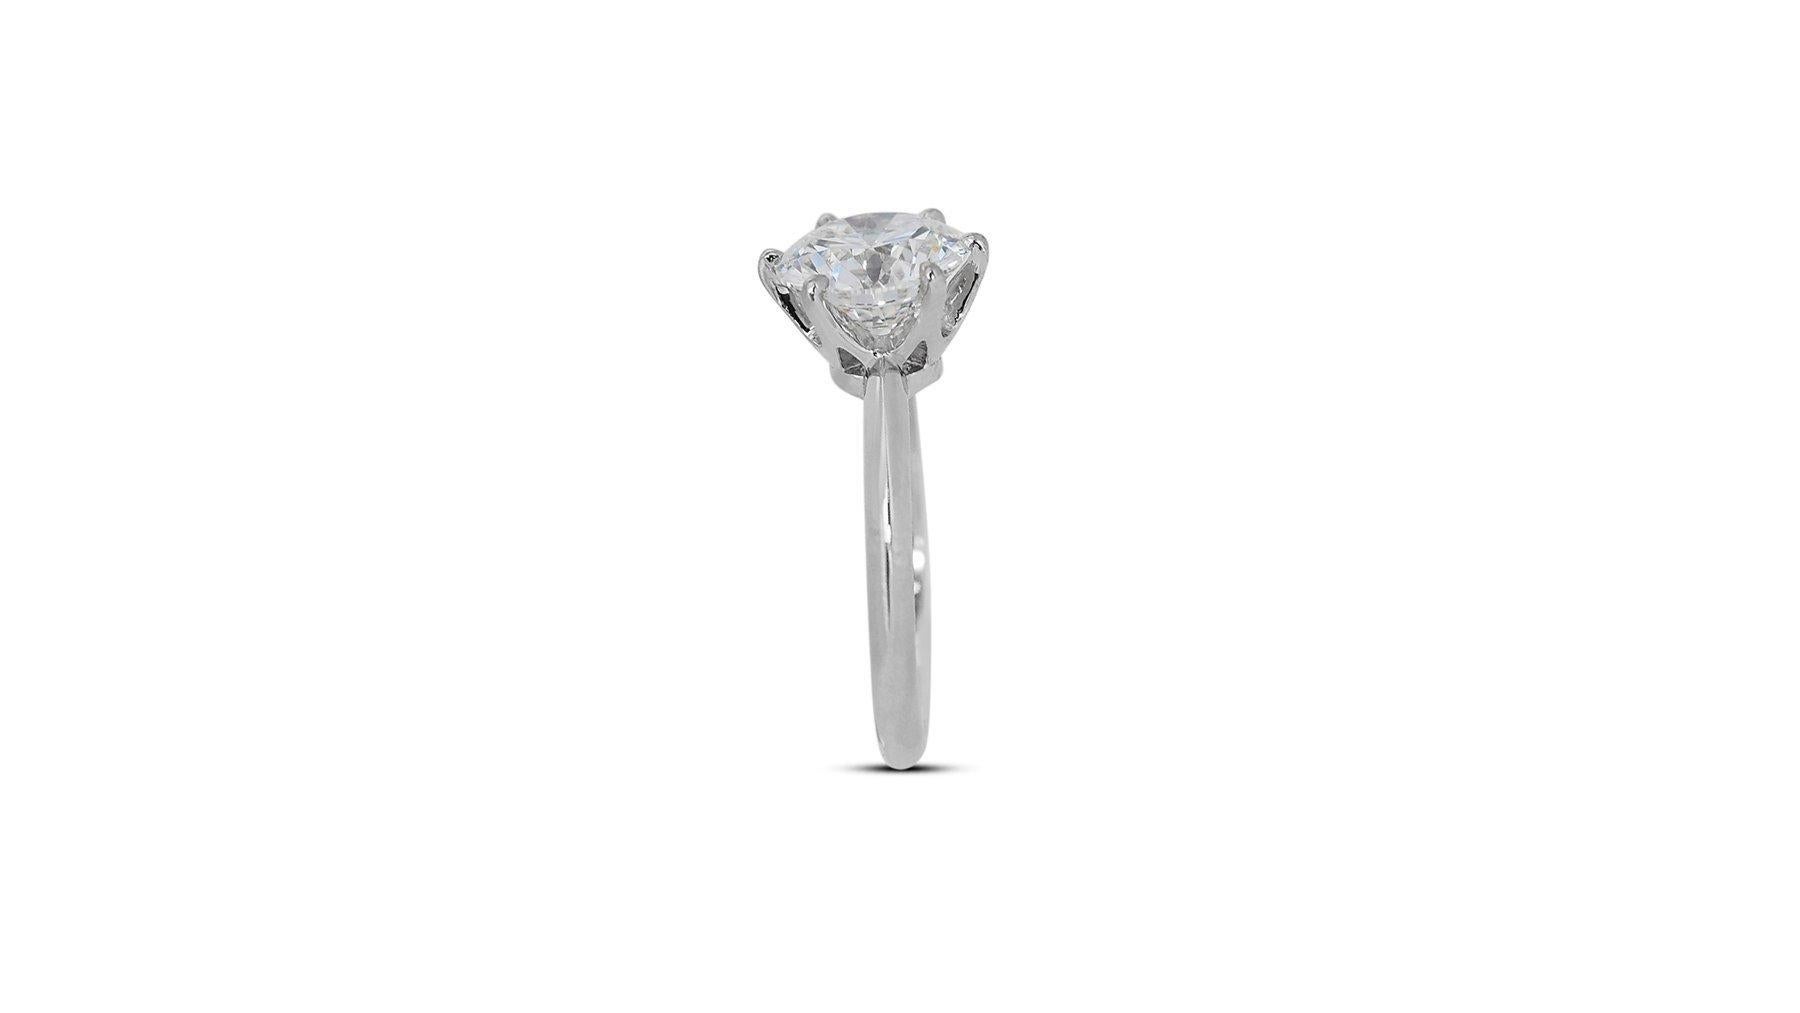 Timeless 3.09ct Diamond Solitaire Ring in 18k White Gold - GIA Certified In New Condition For Sale In רמת גן, IL